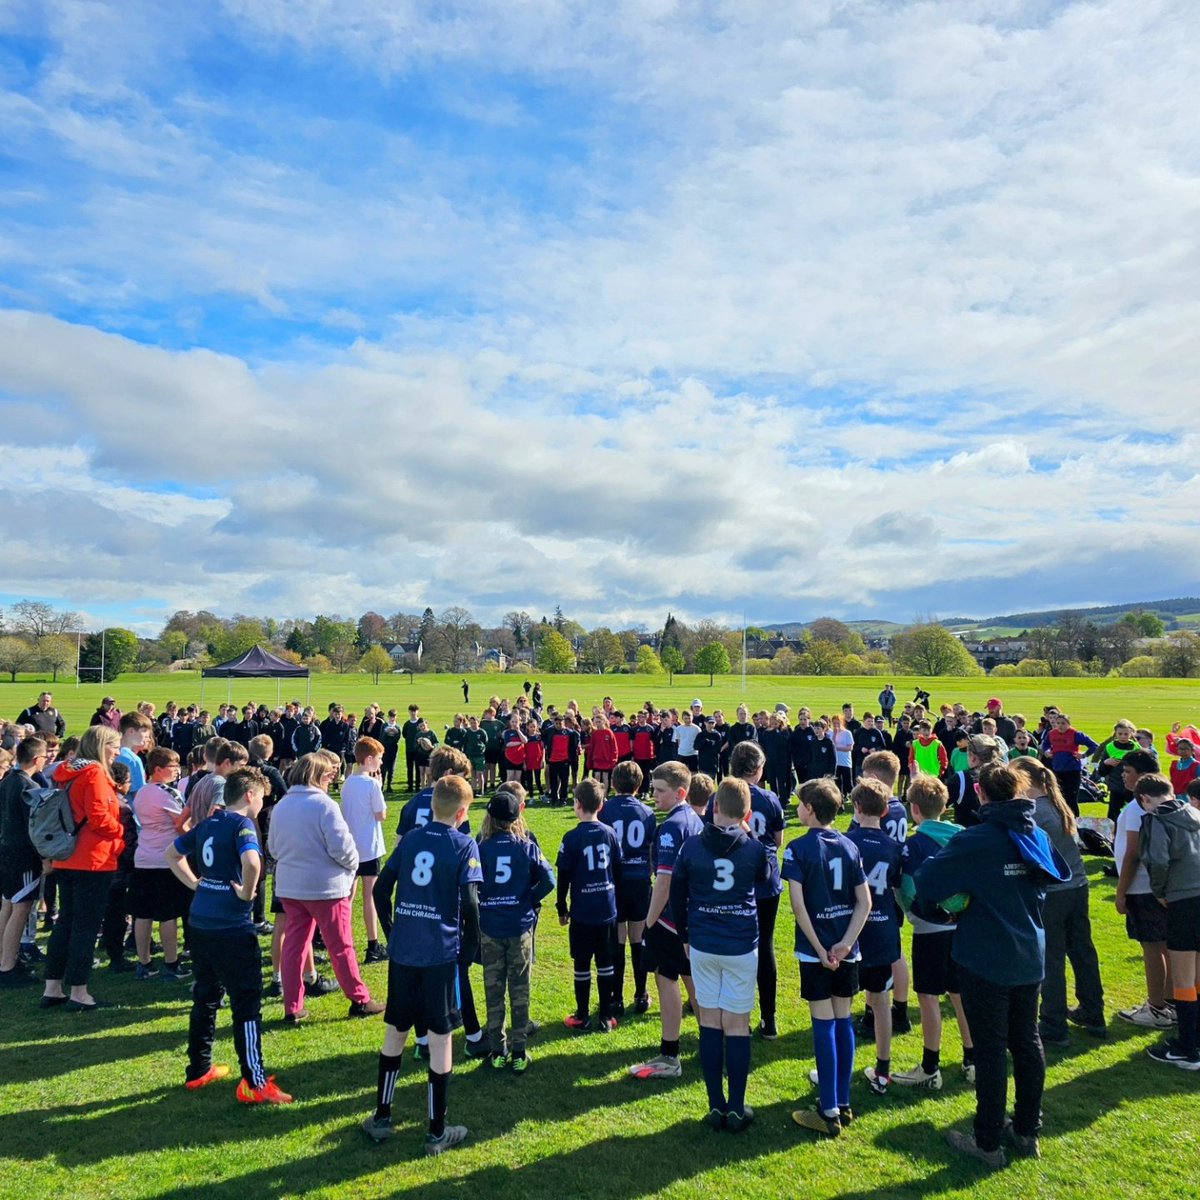 📸 P7 TOUCH RUGBY TOURNAMENT 'Highland Perthshire All-Stars' did brilliantly this morning at @PerthshireRugby's P7 touch tournament. Huge thanks to Eilidh and Aberfeldy RFC! @BreadalbaneAcad @PitlochrySchool @Grandtullyps @KenmorePS @RoyalDunkeldPS @GlenlyonP1_7